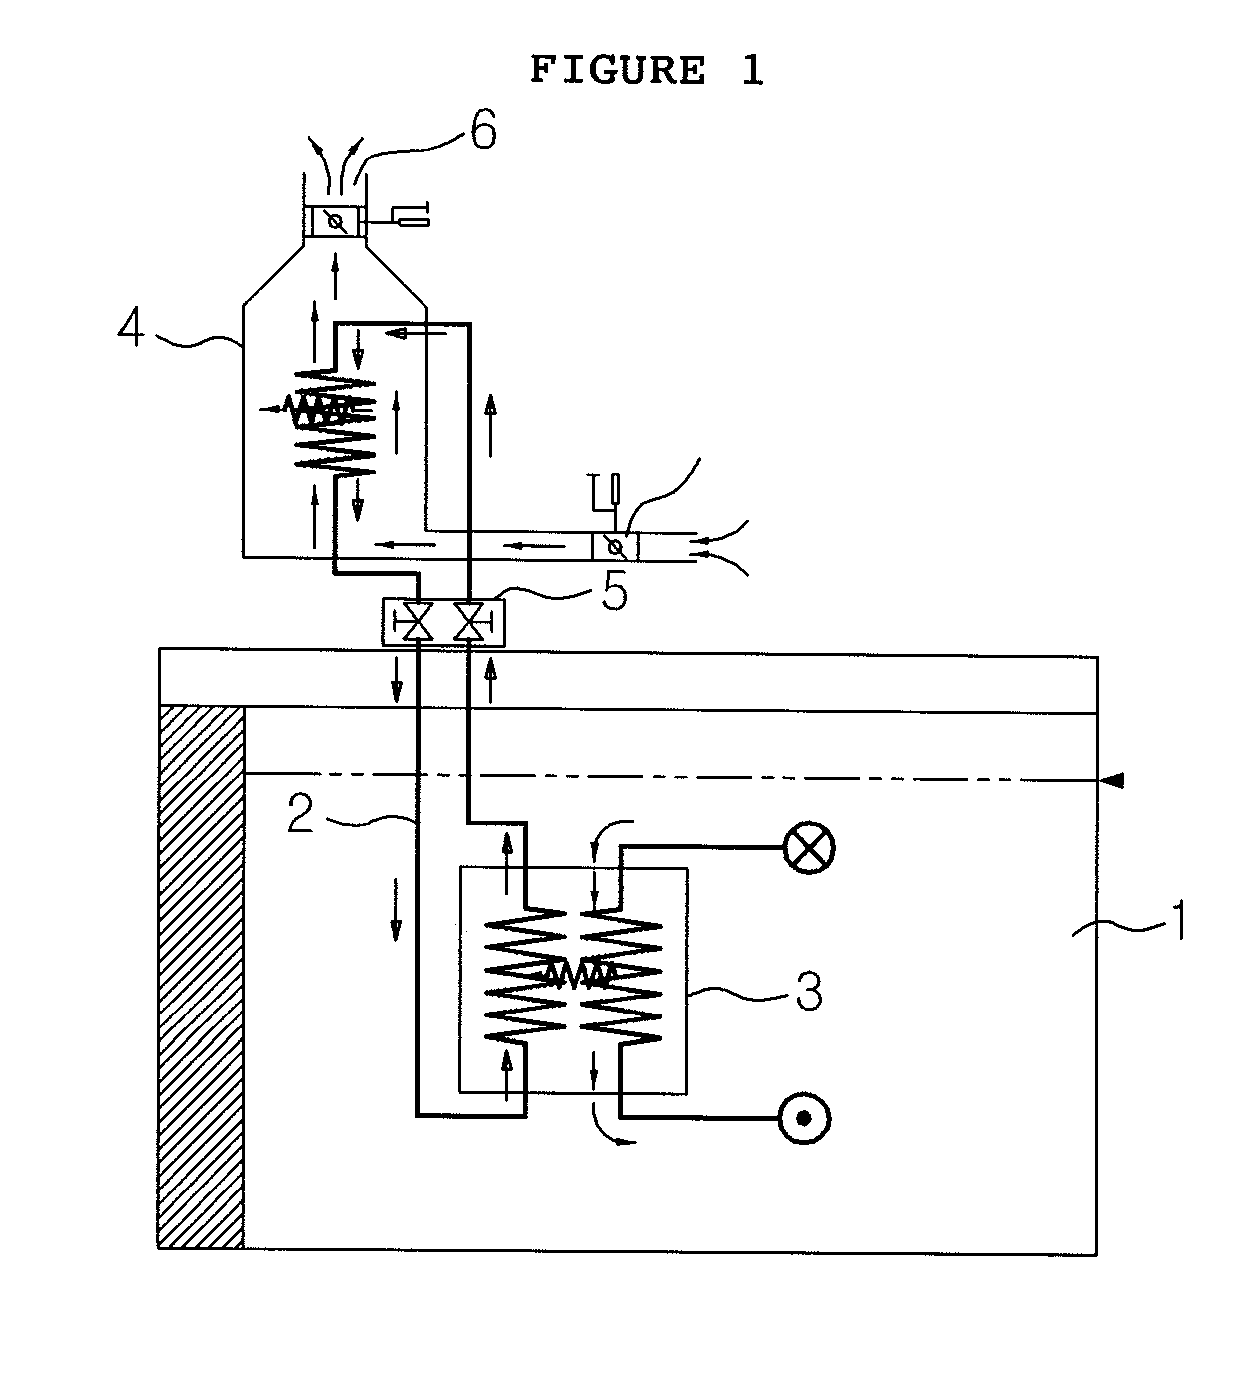 Fully passive decay heat removal system for sodium-cooled fast reactors that utilizes partially immersed decay heat exchanger